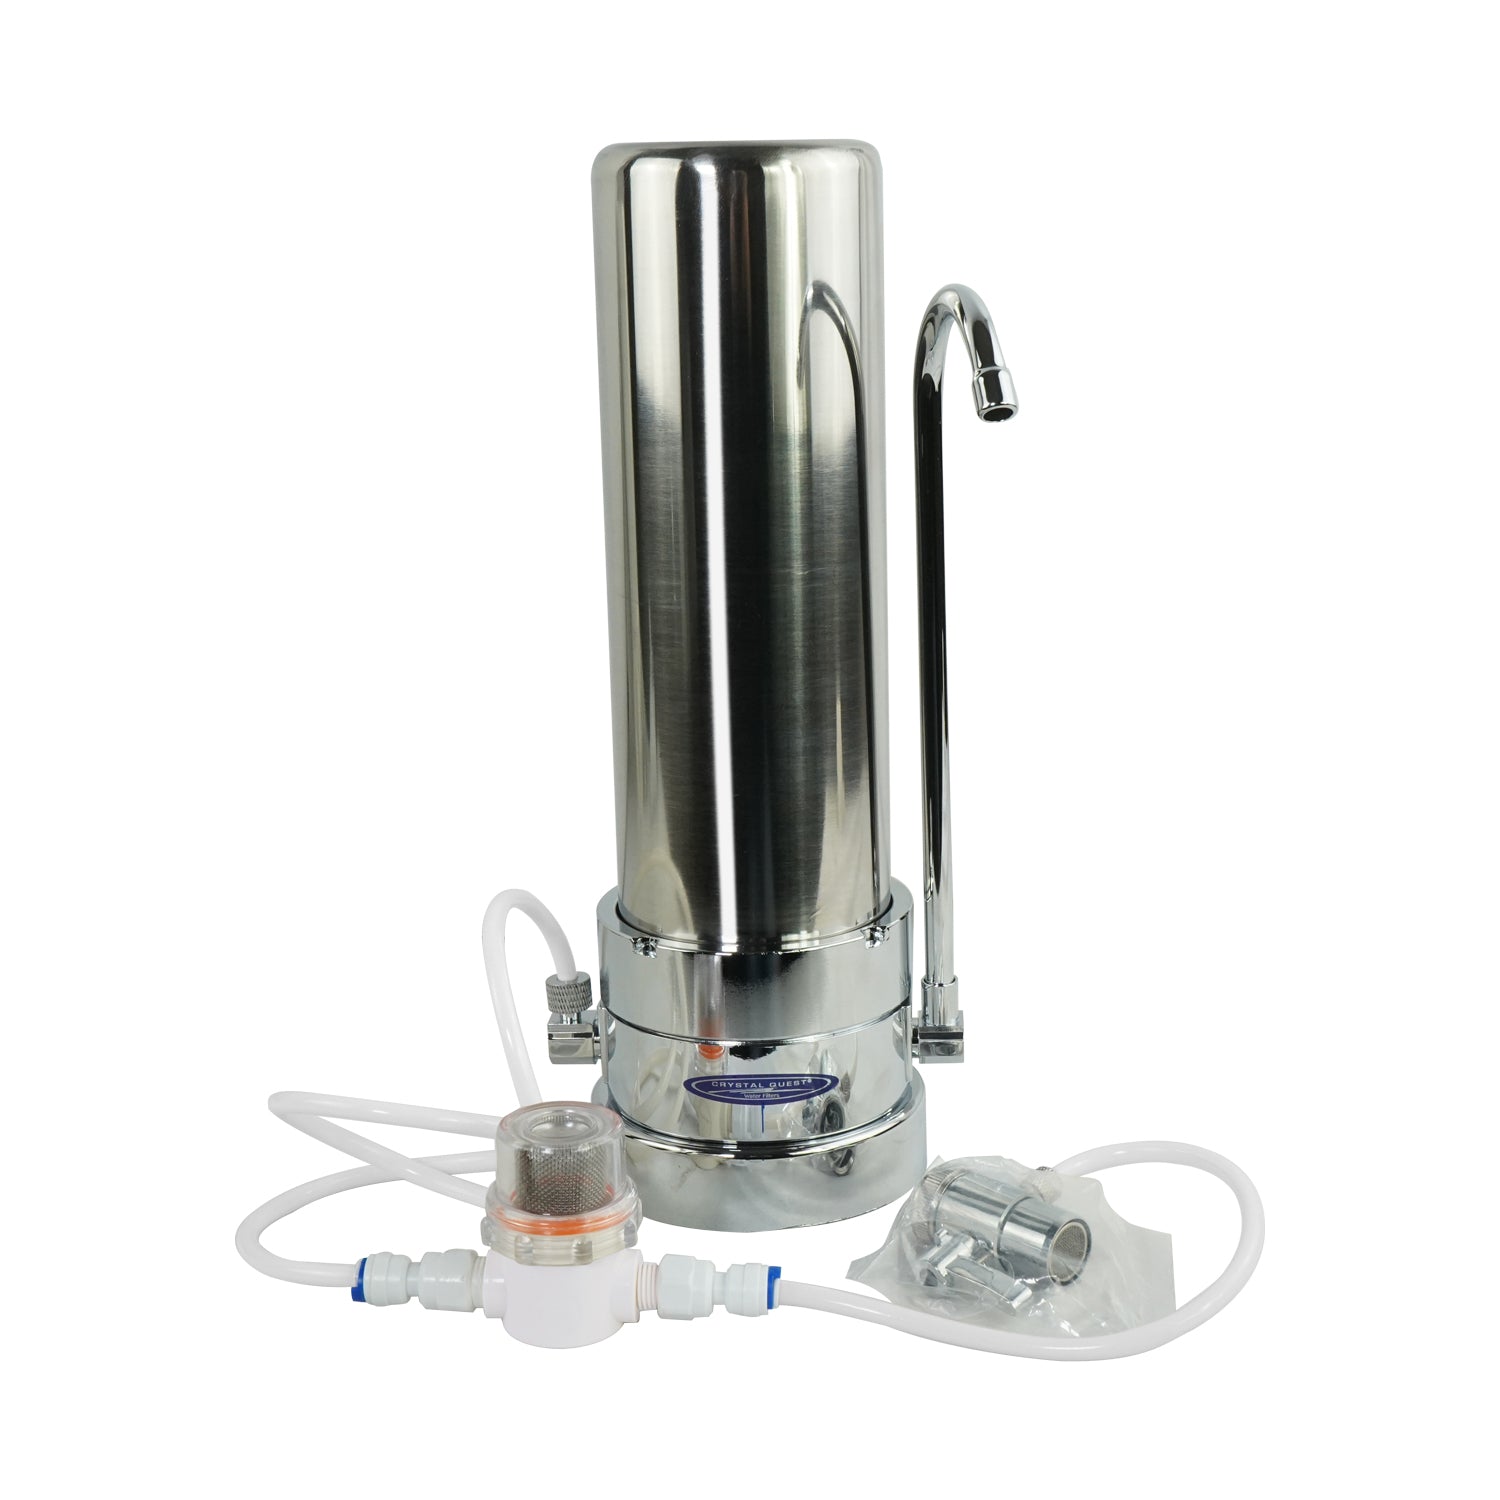 Alkaline Countertop Water Filter System - Countertop Water Filters - Crystal Quest